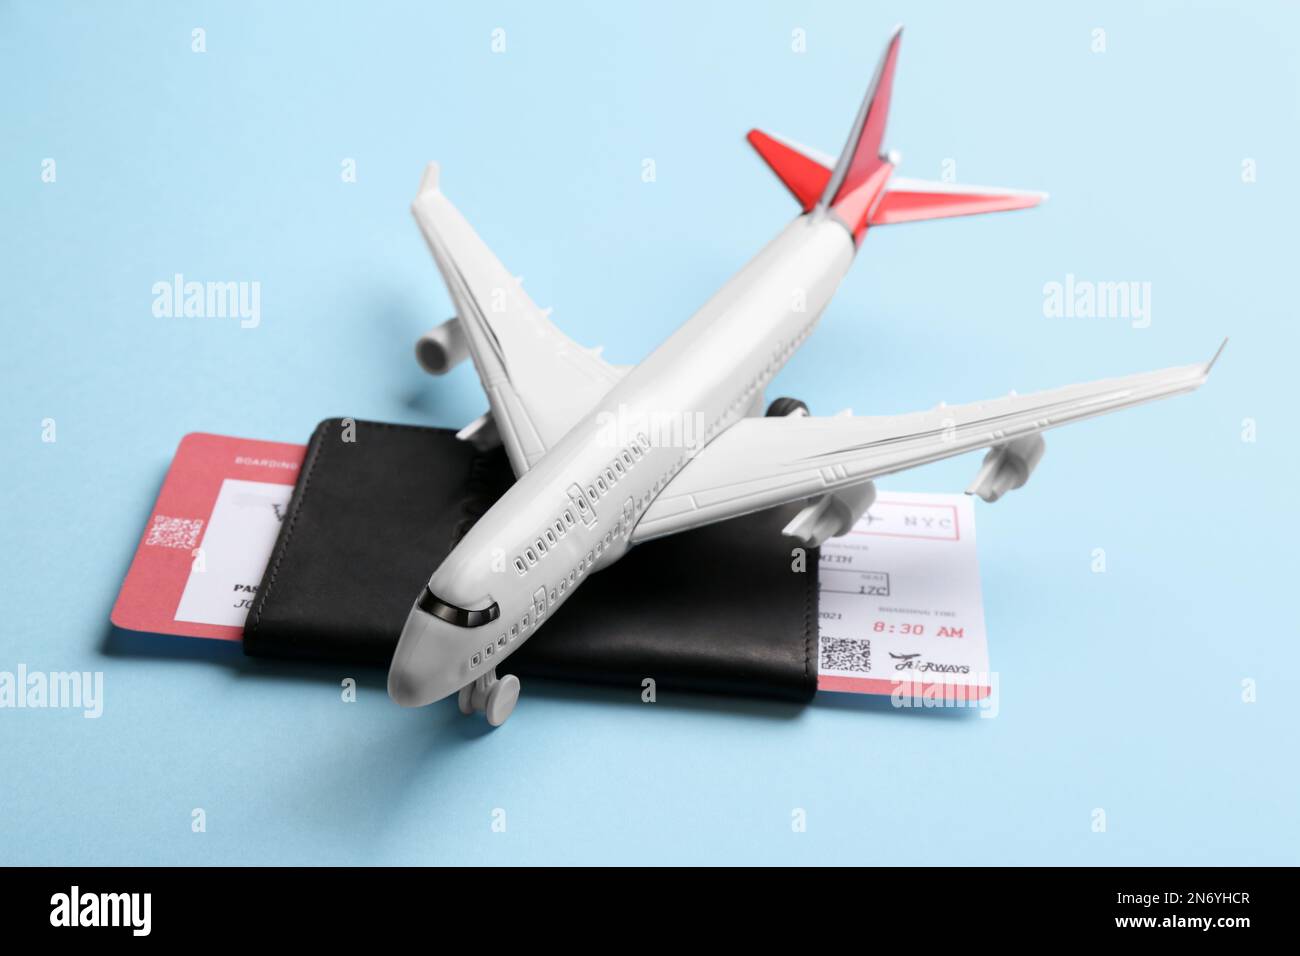 Toy airplane and passport with ticket on light blue background Stock Photo